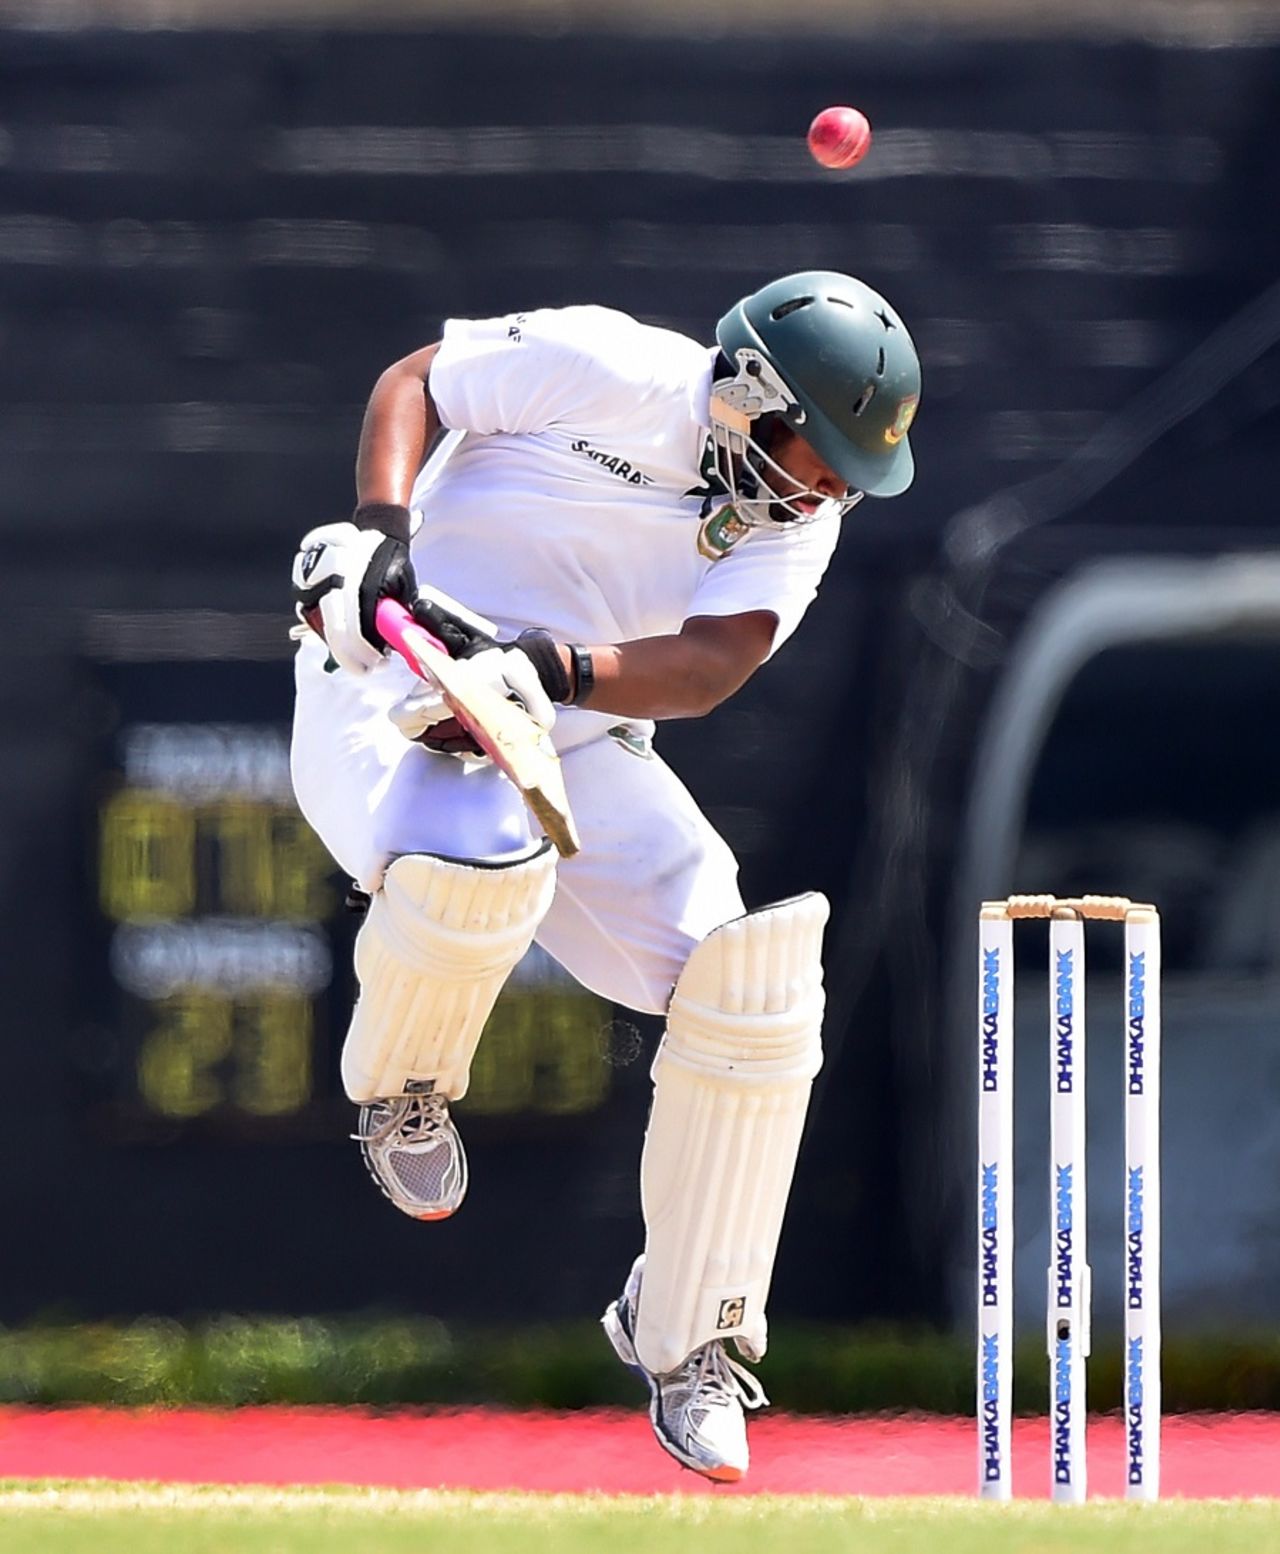 Tamim Iqbal gets under short ball, West Indies v Bangladesh, 2nd Test, St. Lucia, 4th day, September 16, 2014